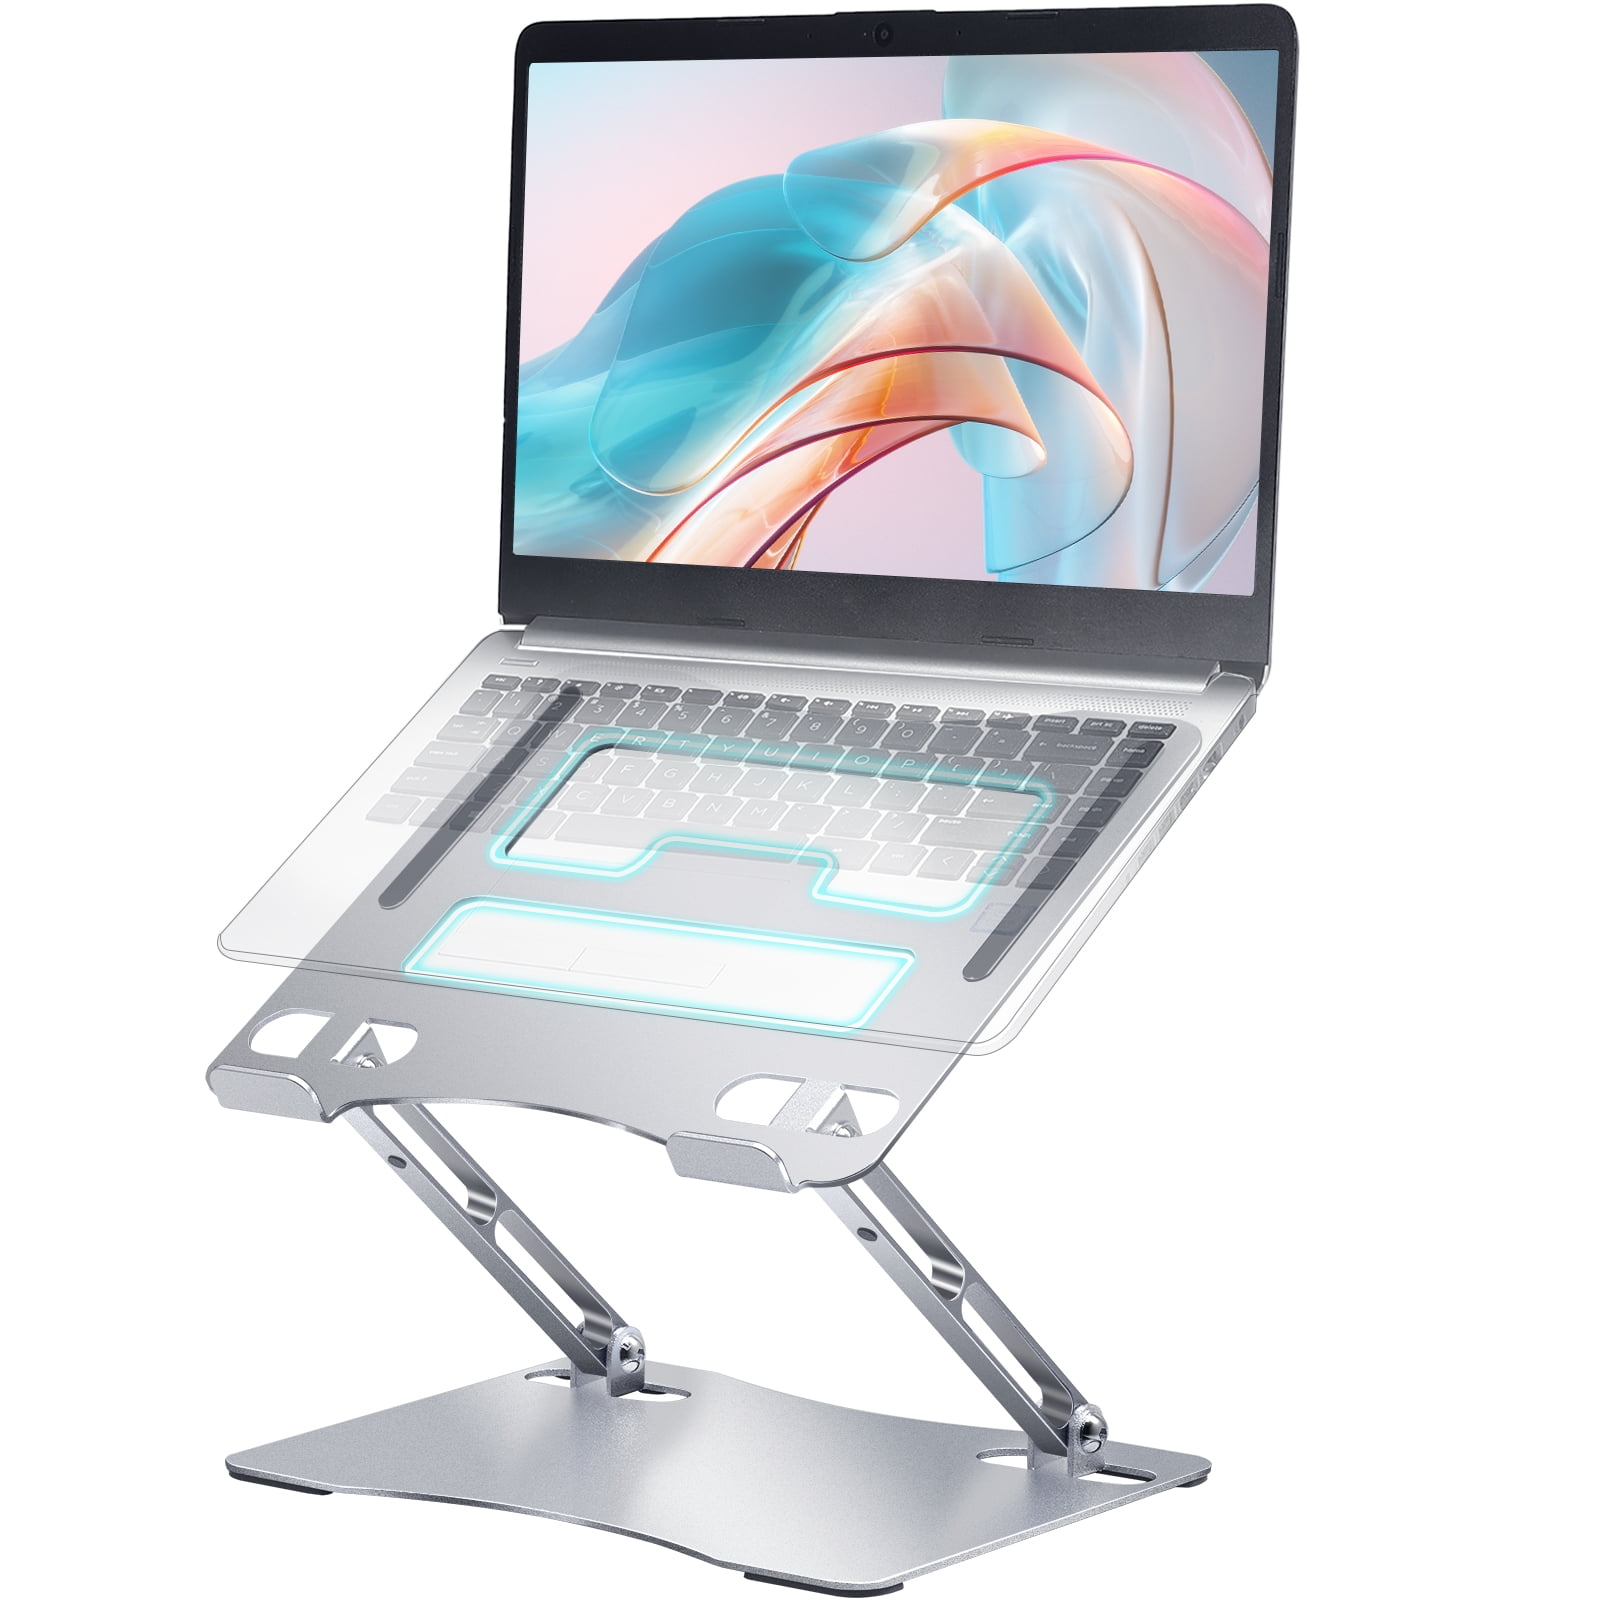 Ergonomic Laptop Stand for Desk, Adjustable Height up to 20, Laptop Riser  Computer Pulpit Stand for Laptop, Portable Laptop Stands, Fits MacBook,  Laptops 10 15 17 inches Laptop Holder and Laptop Desk 